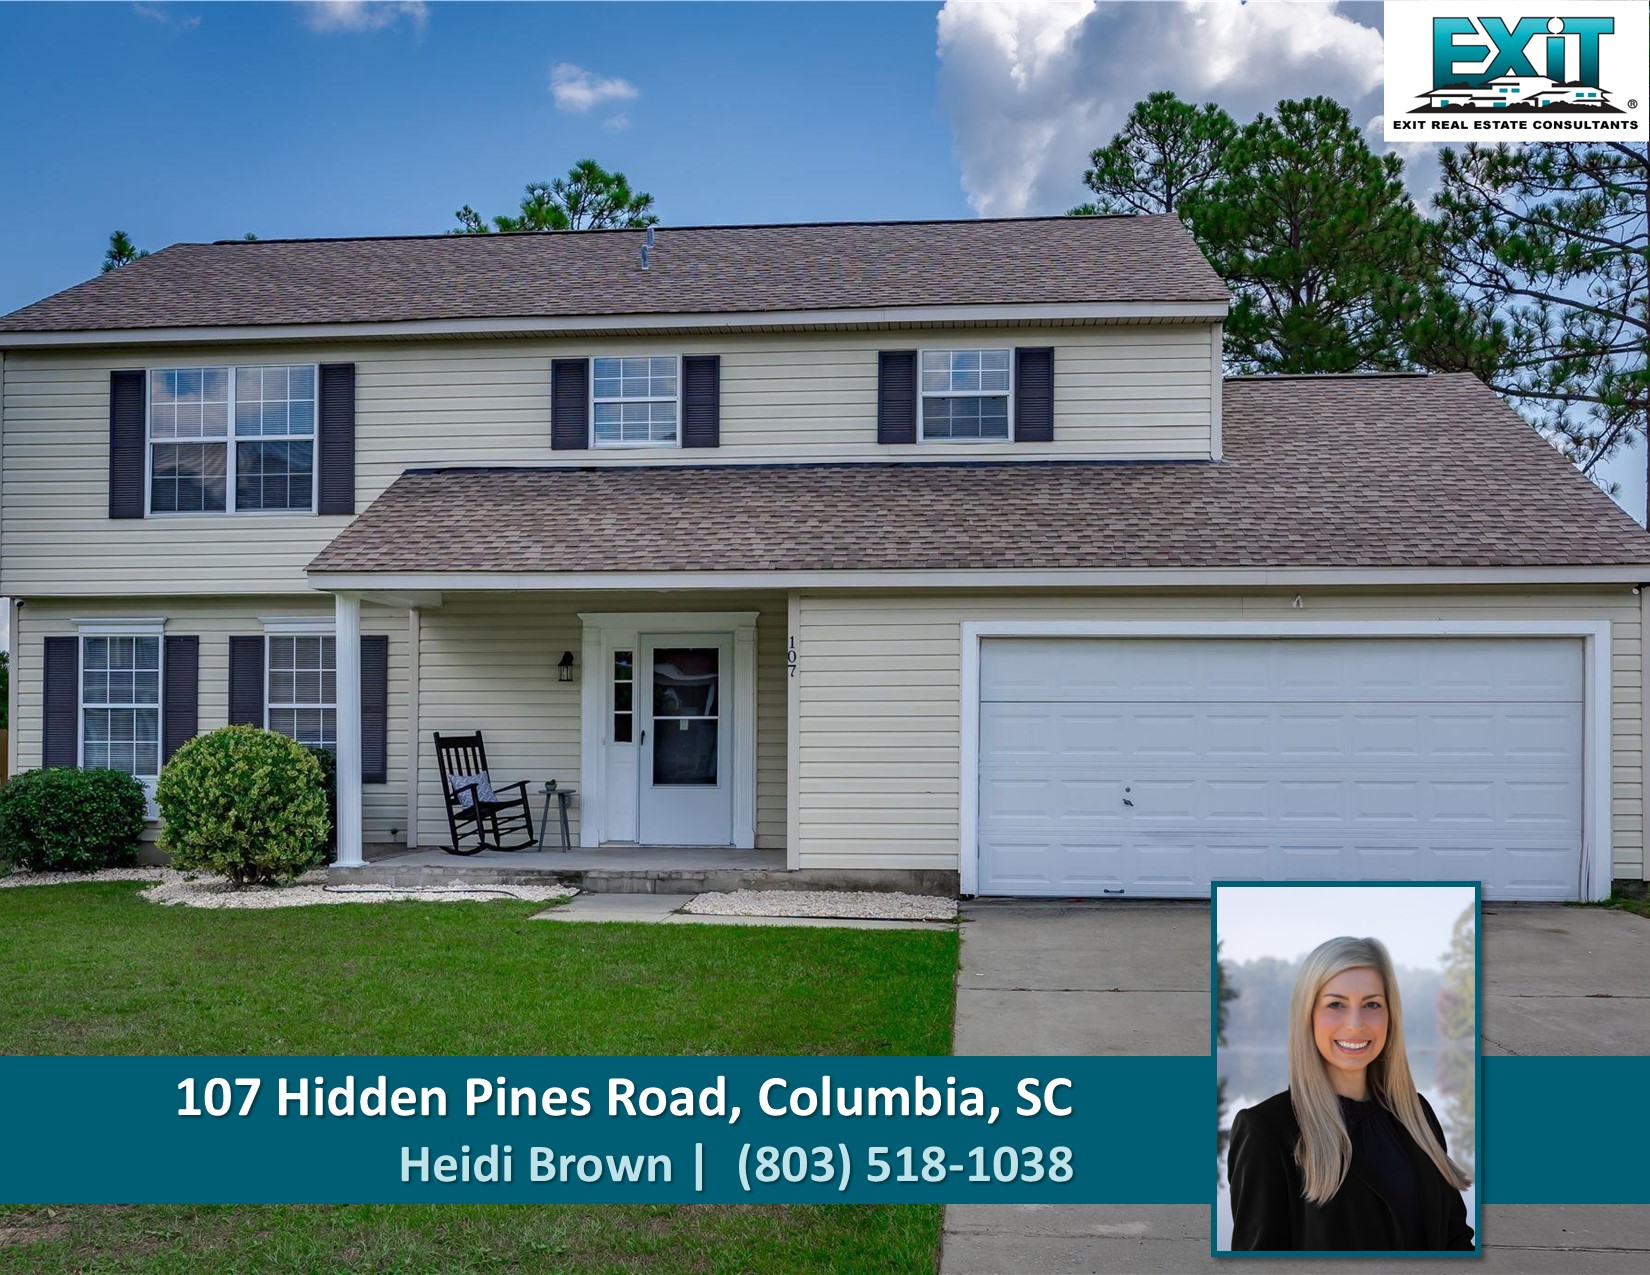 Just listed in Hidden Pines - Columbia